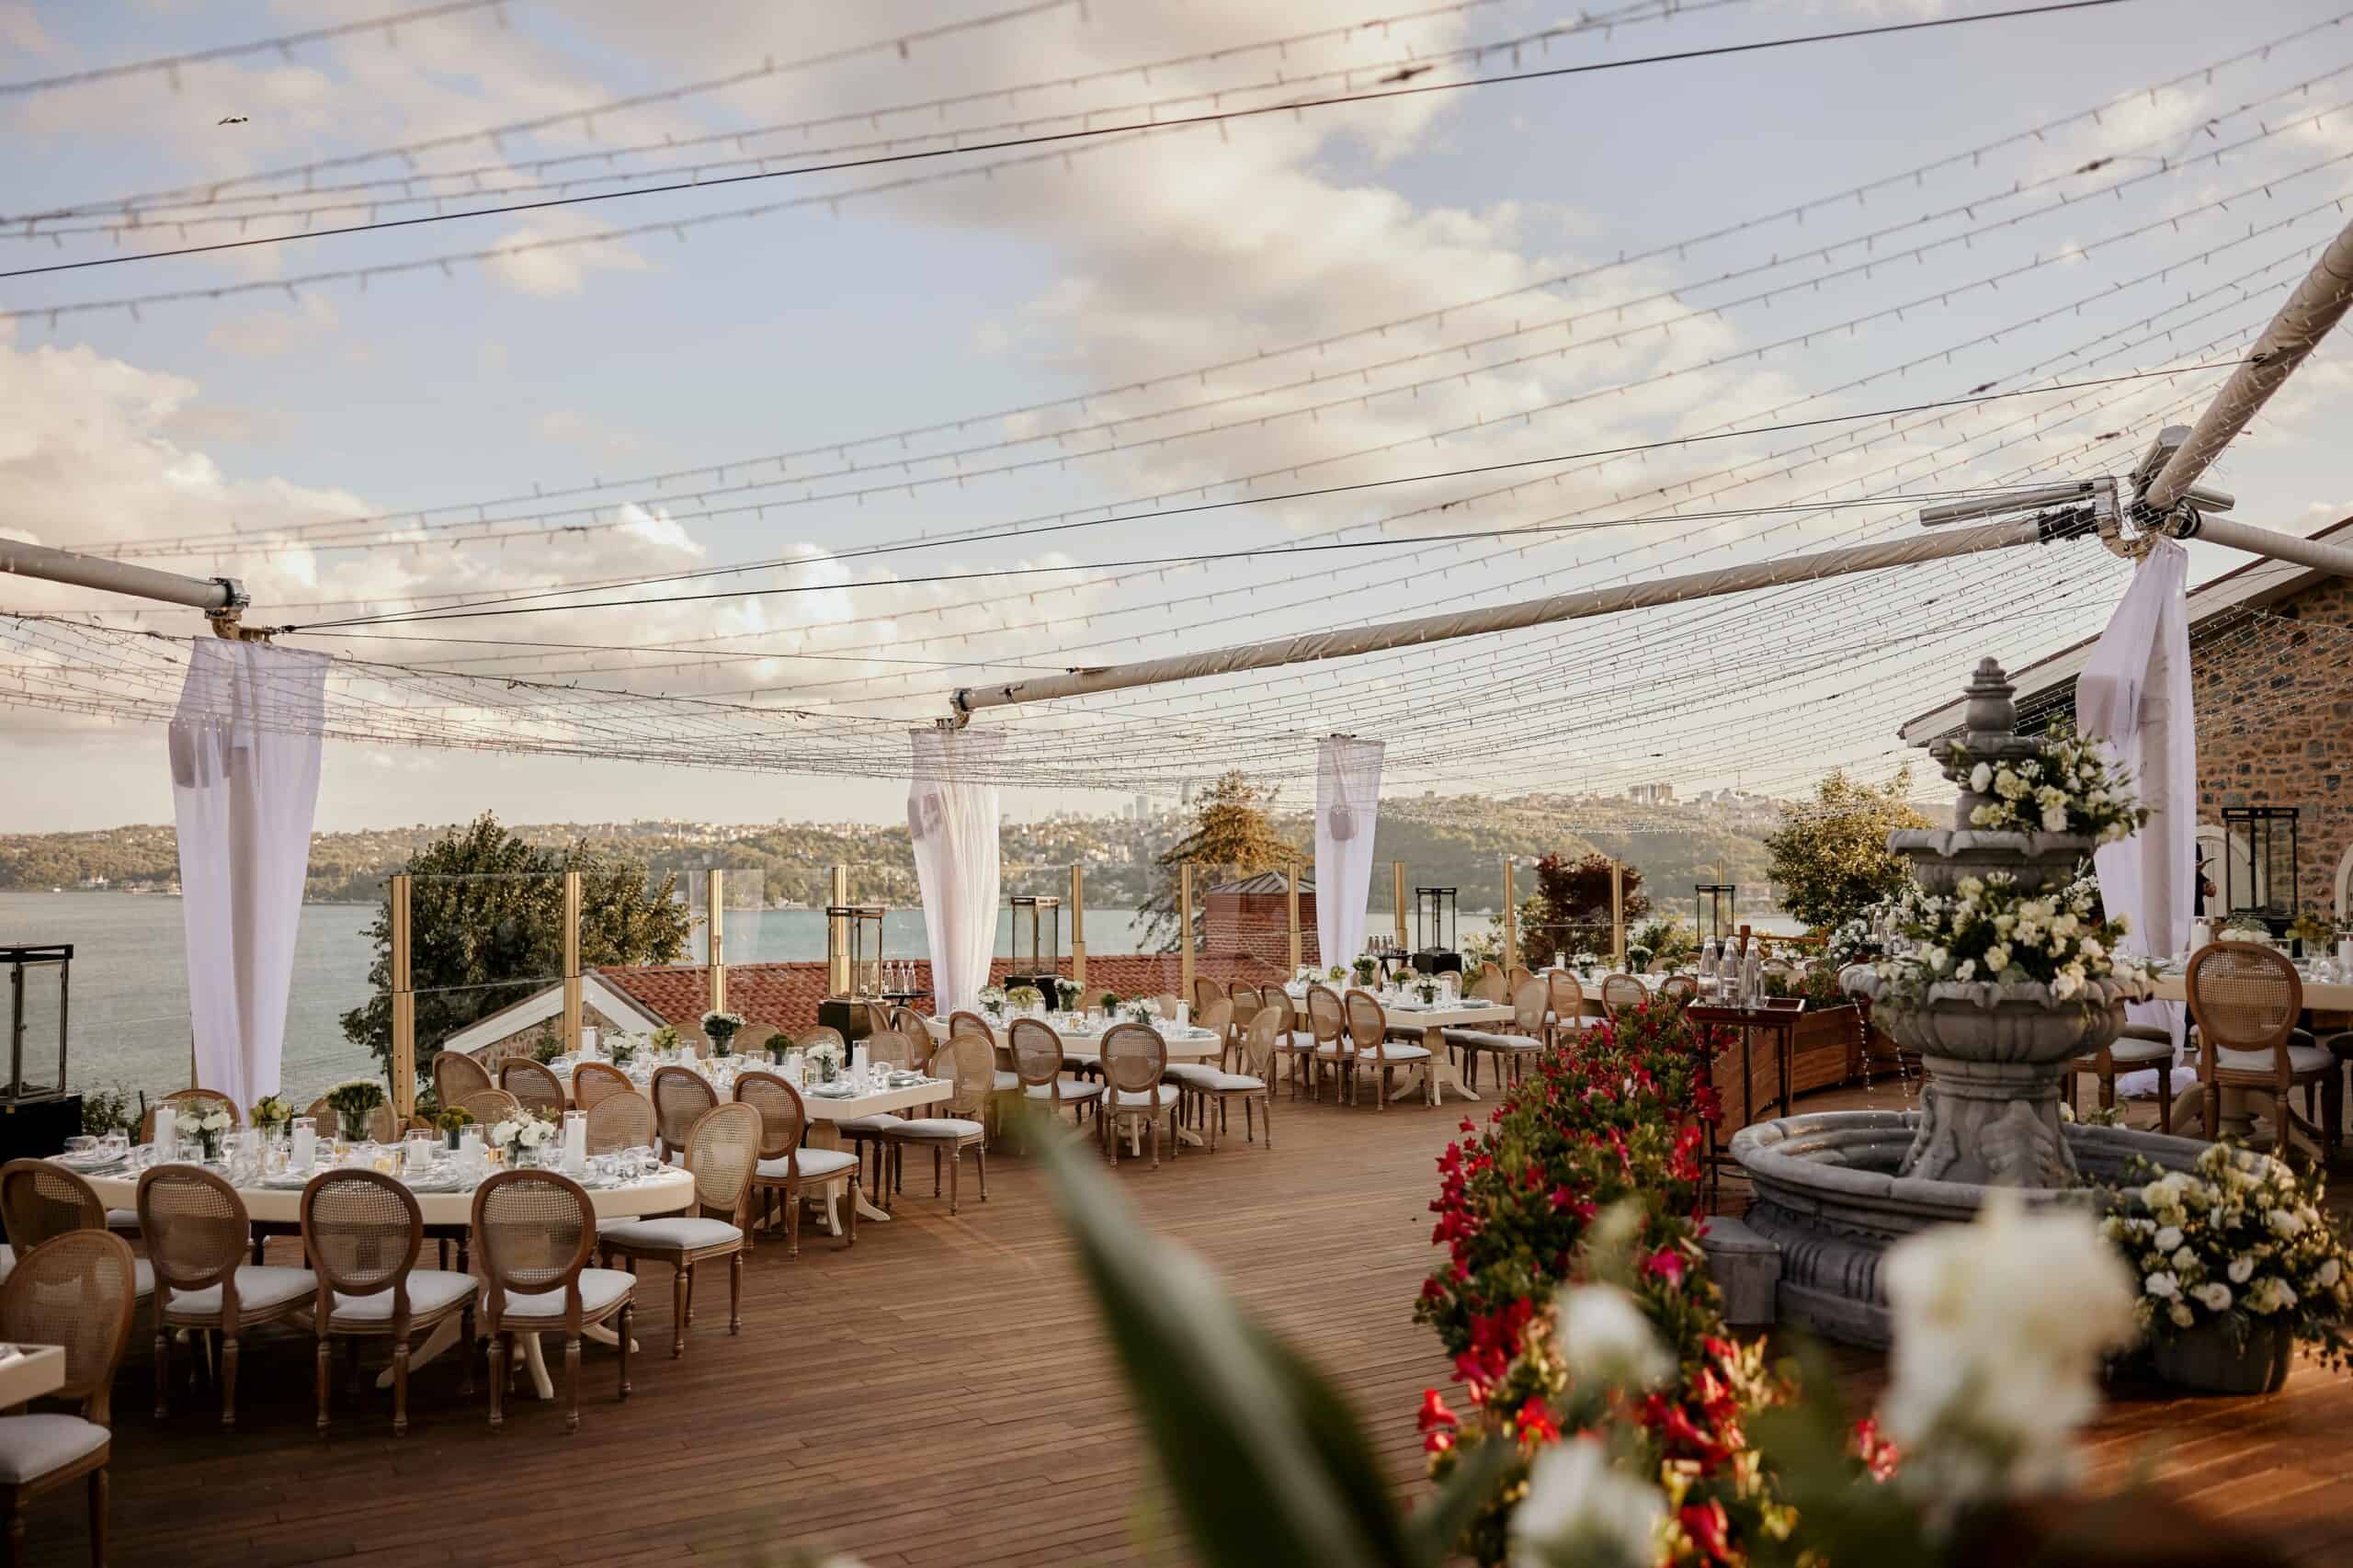 Picturesque outdoor venue with mindblowing views